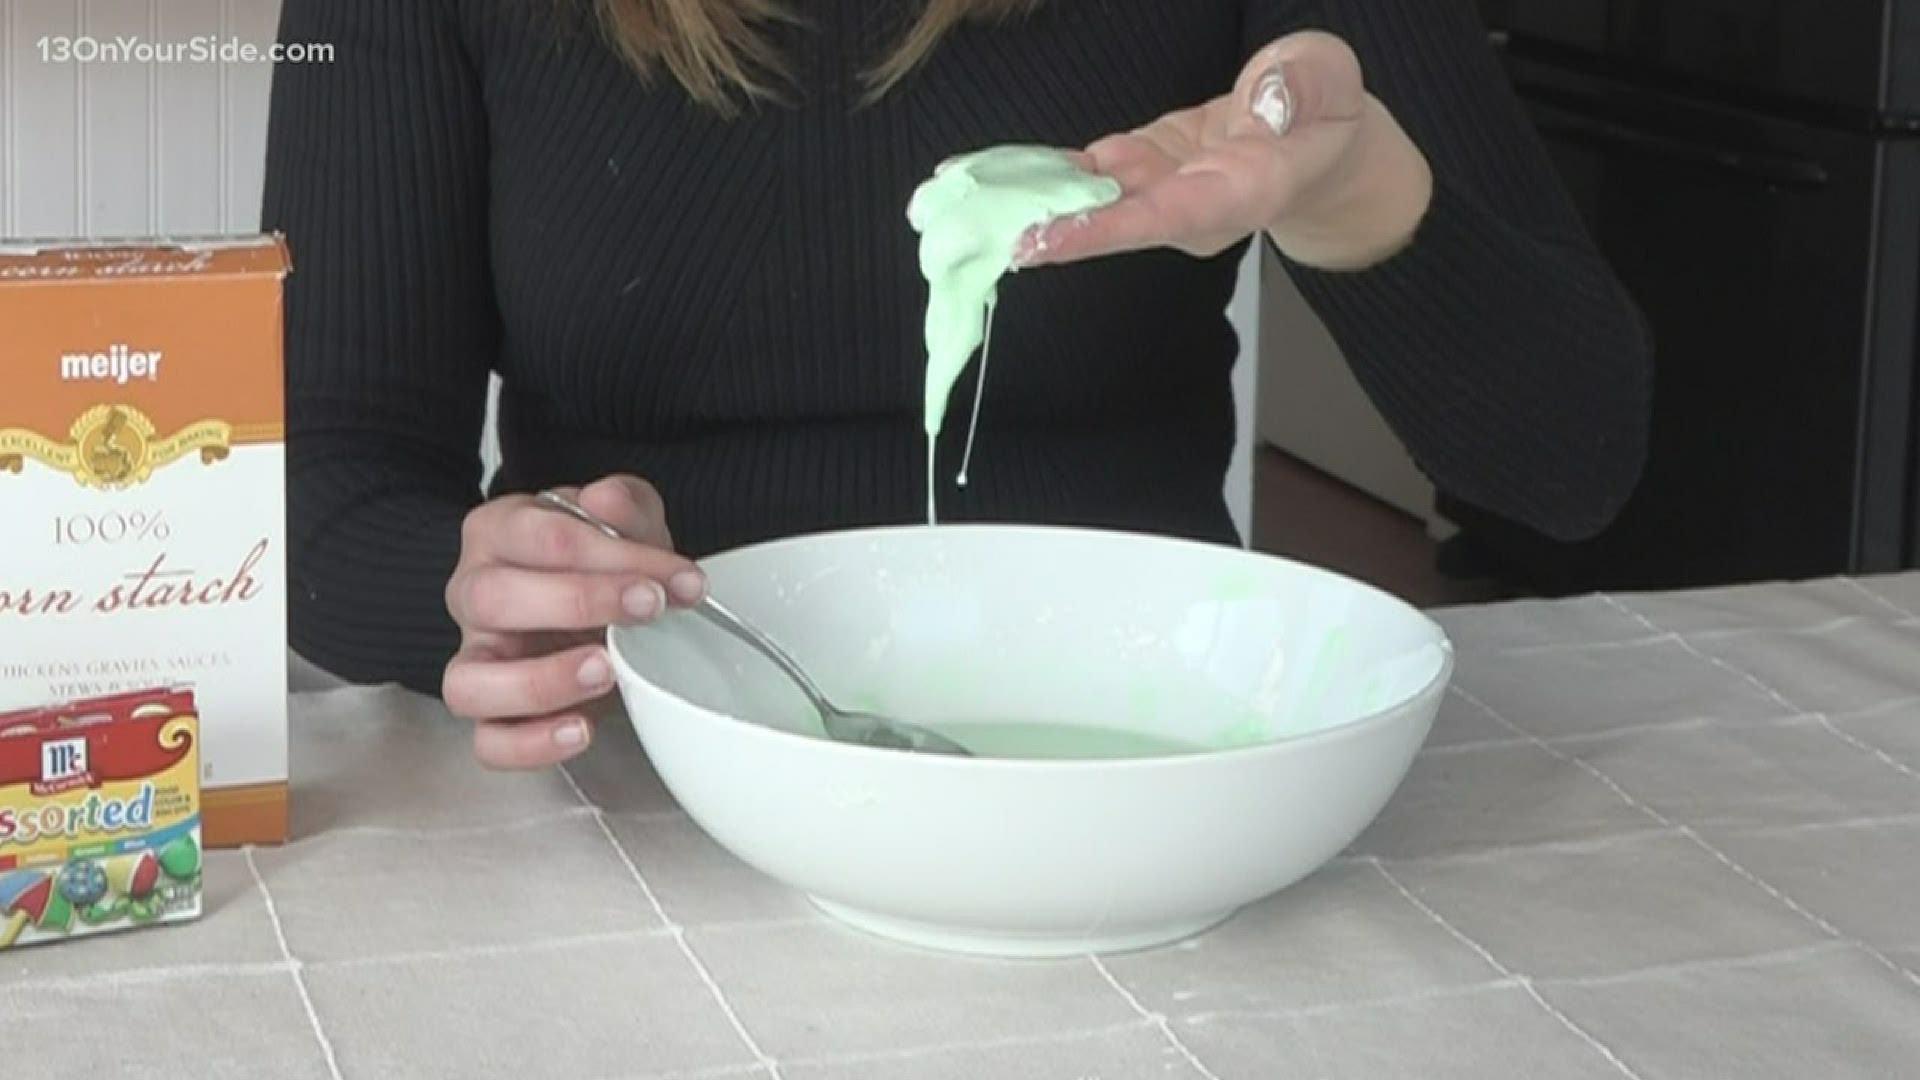 Oobleck is a non-Newtonian substance, meaning it has properties of both a solid and a liquid.